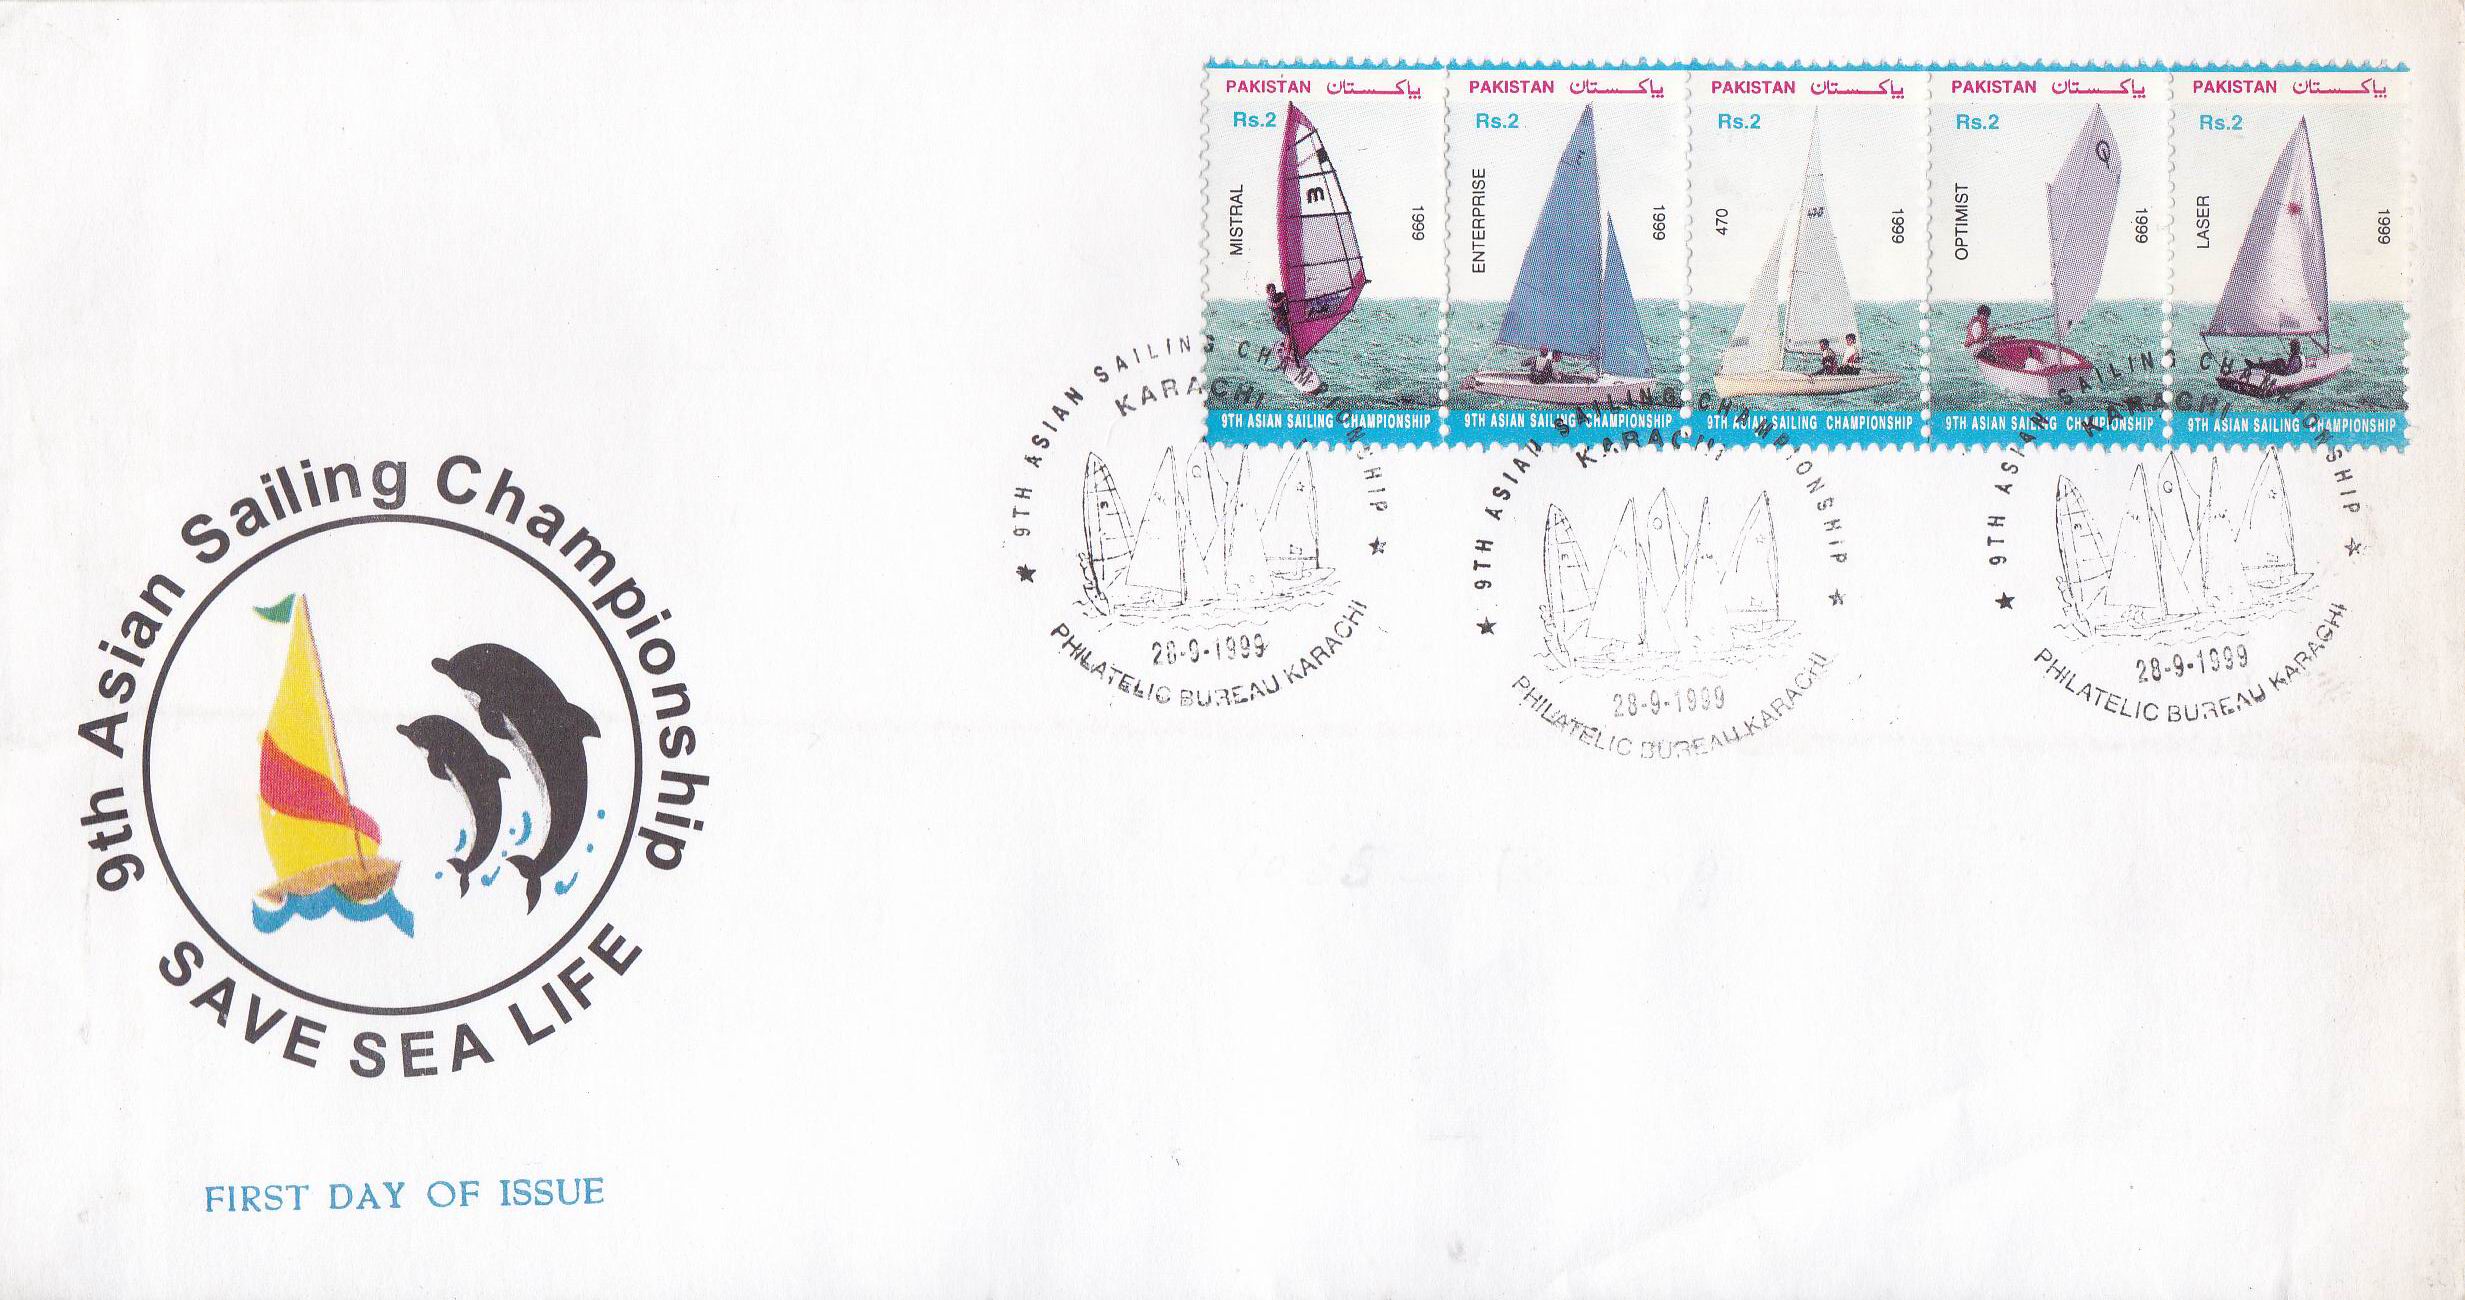 Pakistan Fdc 1999 Brochure & Stamps Asian Sailing Championship - Click Image to Close